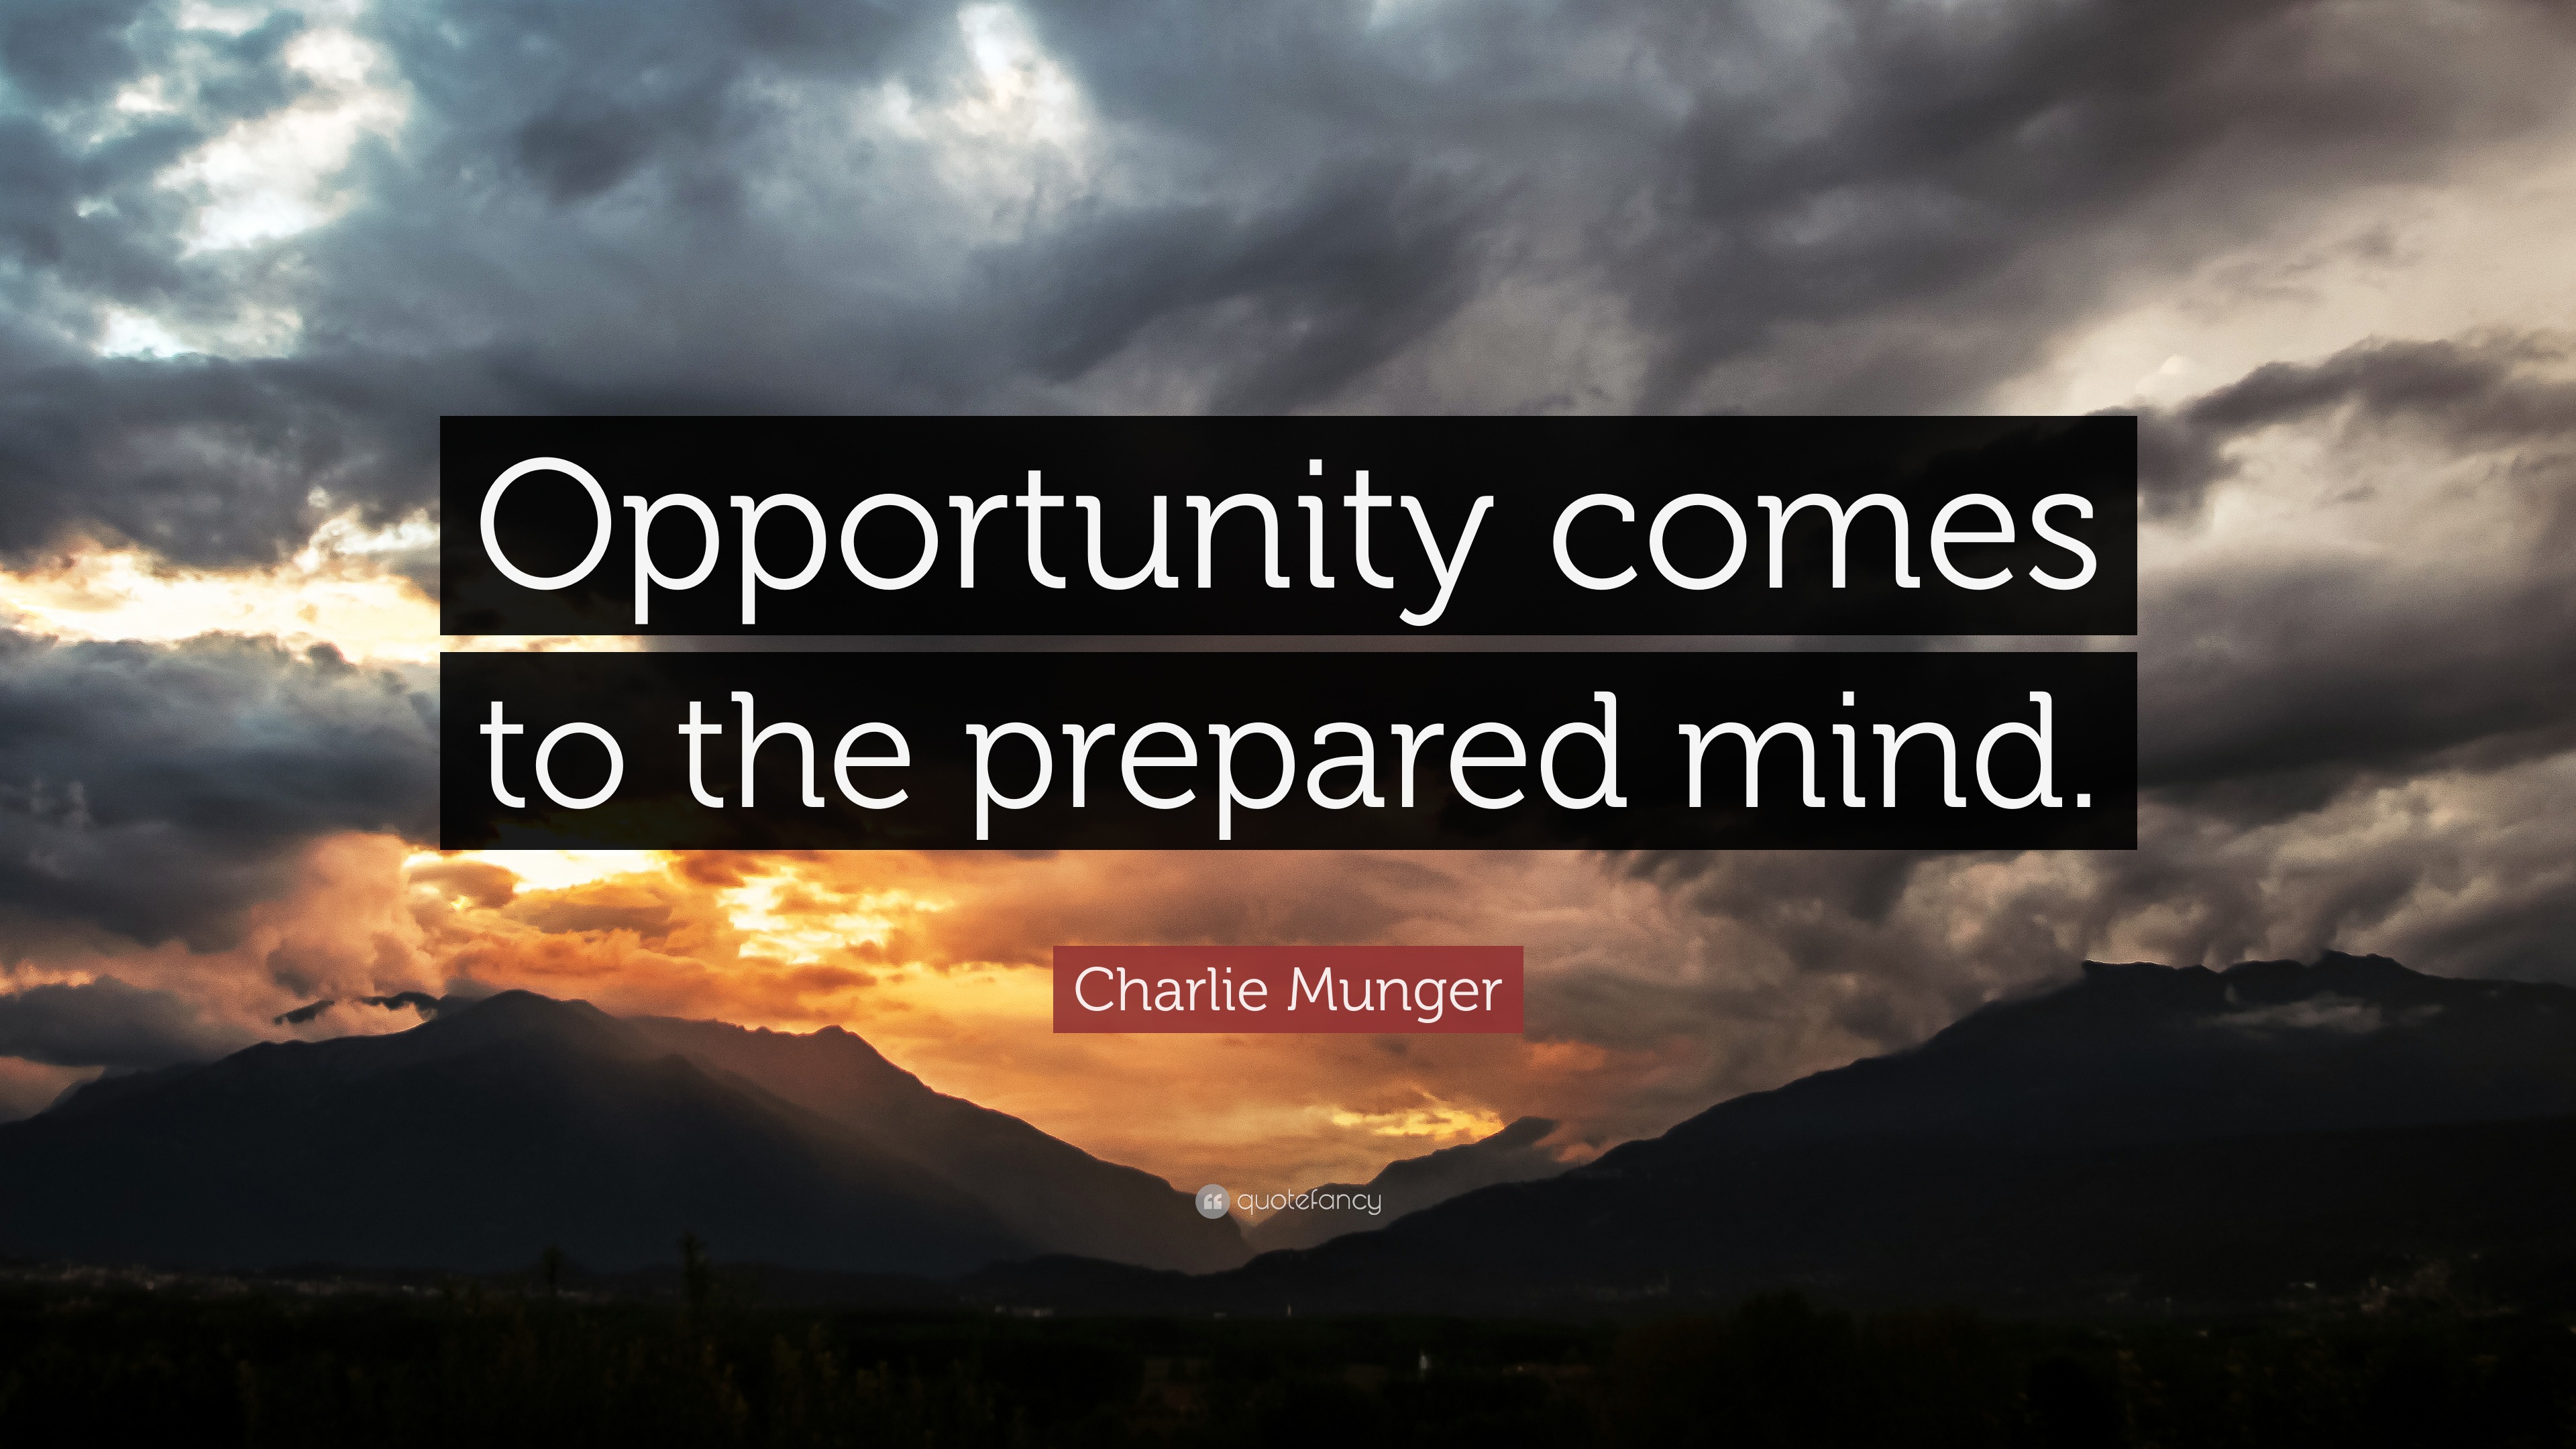 Opportunities present themselves to those who have prepared. : r